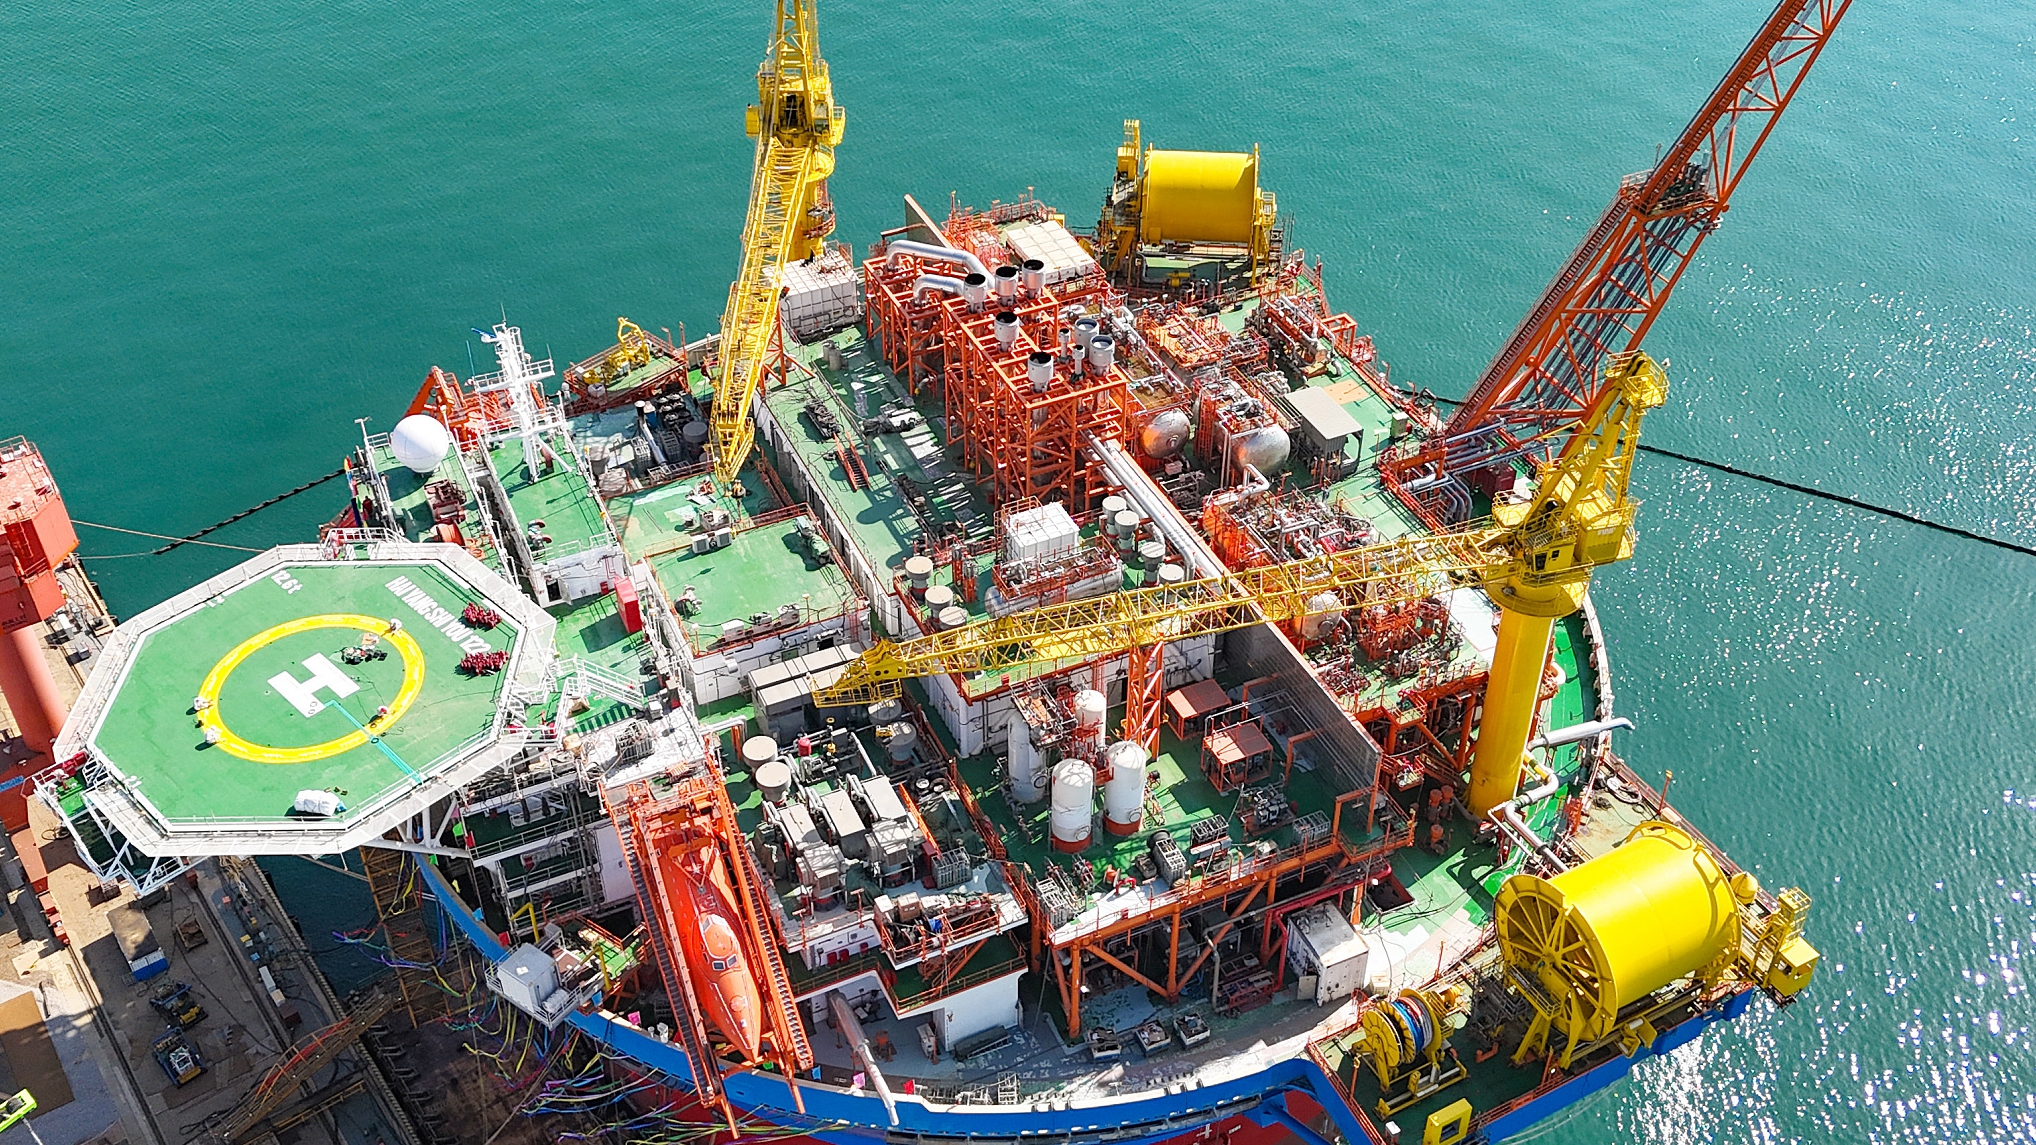 Asia's first cylindrical FPSO facility completed in E China